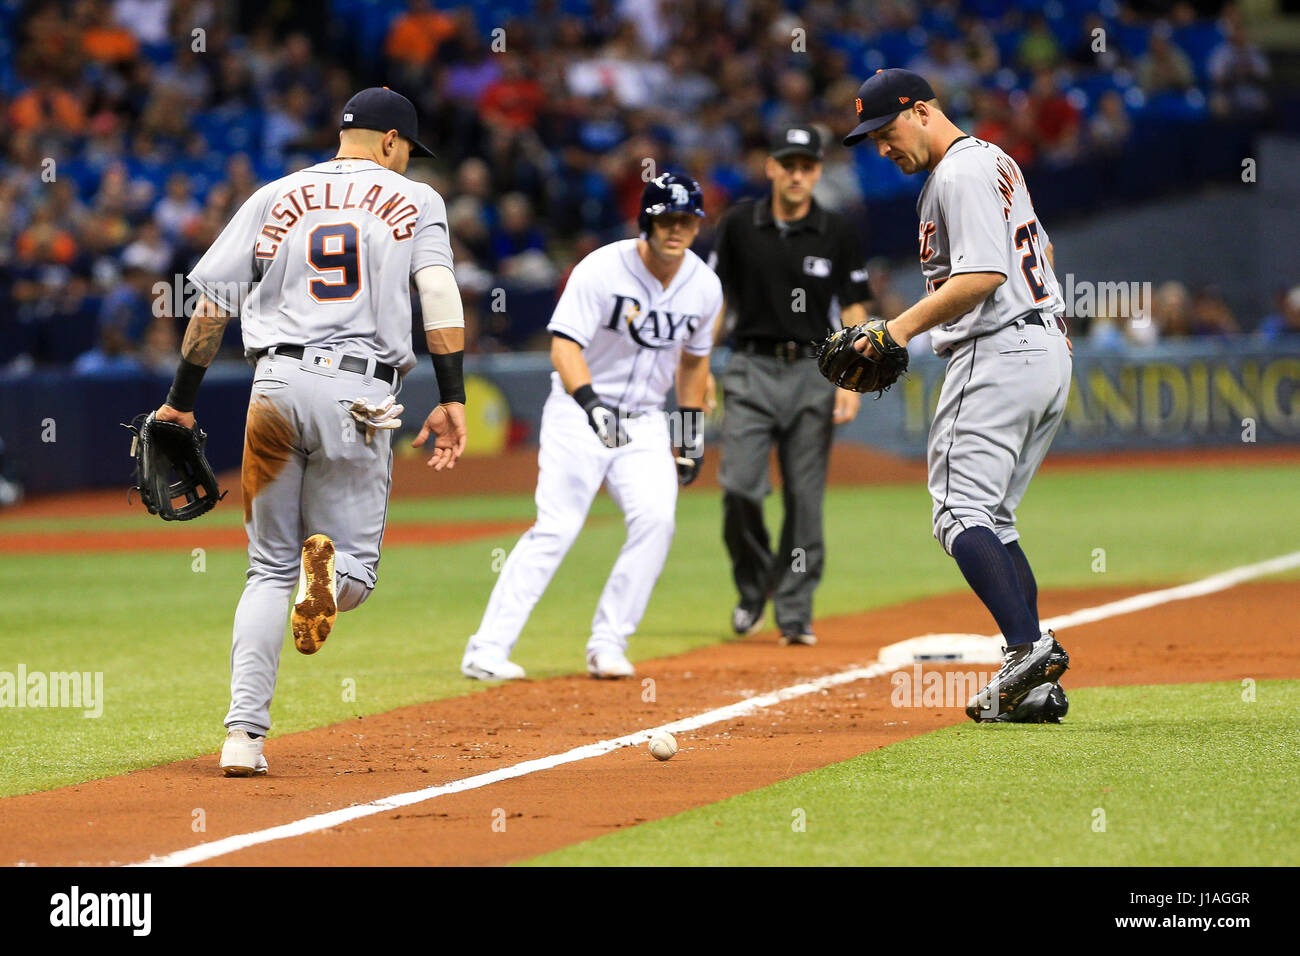 St. Petersburg, Florida, USA. 19th Apr, 2017. WILL VRAGOVIC | Times.Detroit Tigers third baseman Nicholas Castellanos (9), left, and starting pitcher Jordan Zimmermann (27) watch as the bunt by Tampa Bay Rays center fielder Kevin Kiermaier (39) stays fair in the first inning of the game between the Detroit Tigers and the Tampa Bay Rays at Tropicana Field in St. Petersburg, Fla. on Wednesday, April 19, 2017. Credit: Will Vragovic/Tampa Bay Times/ZUMA Wire/Alamy Live News Stock Photo